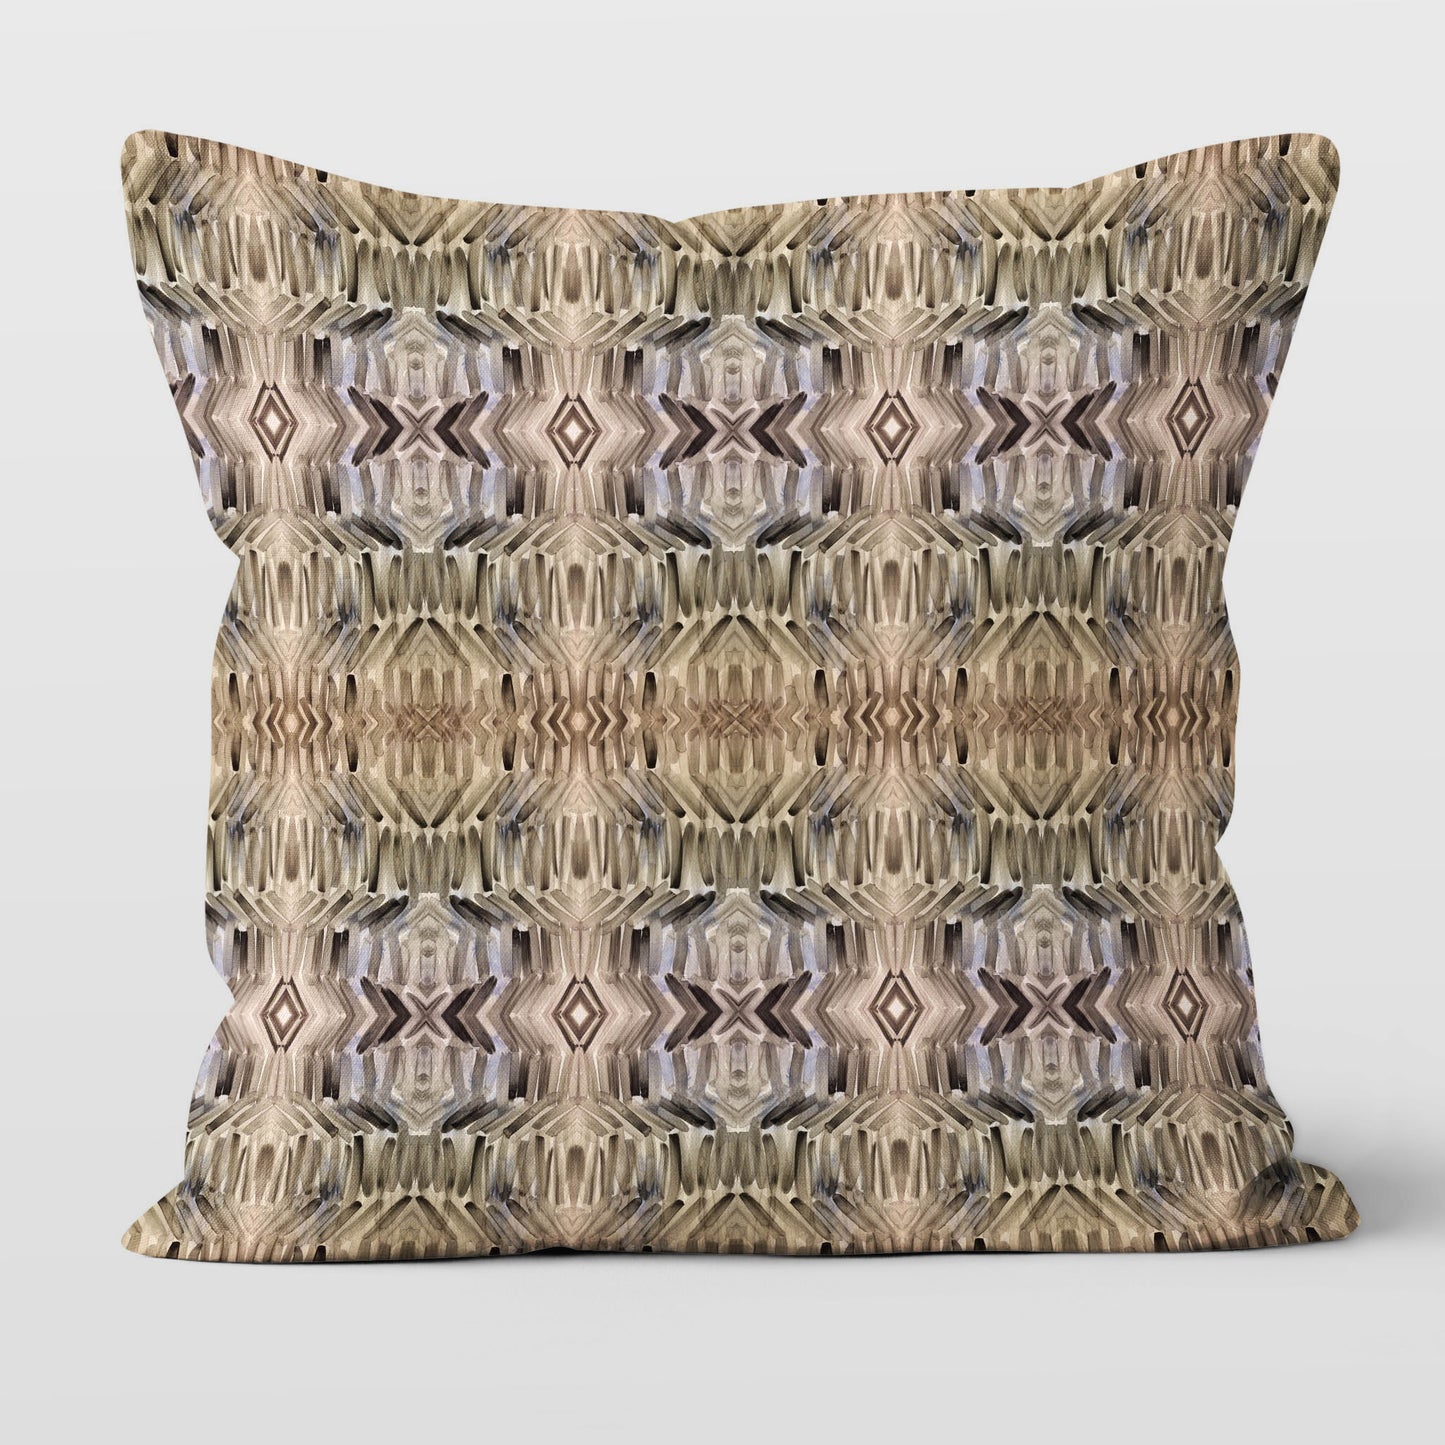 Pillow featuring abstract hand-painted pattern in neutral tones